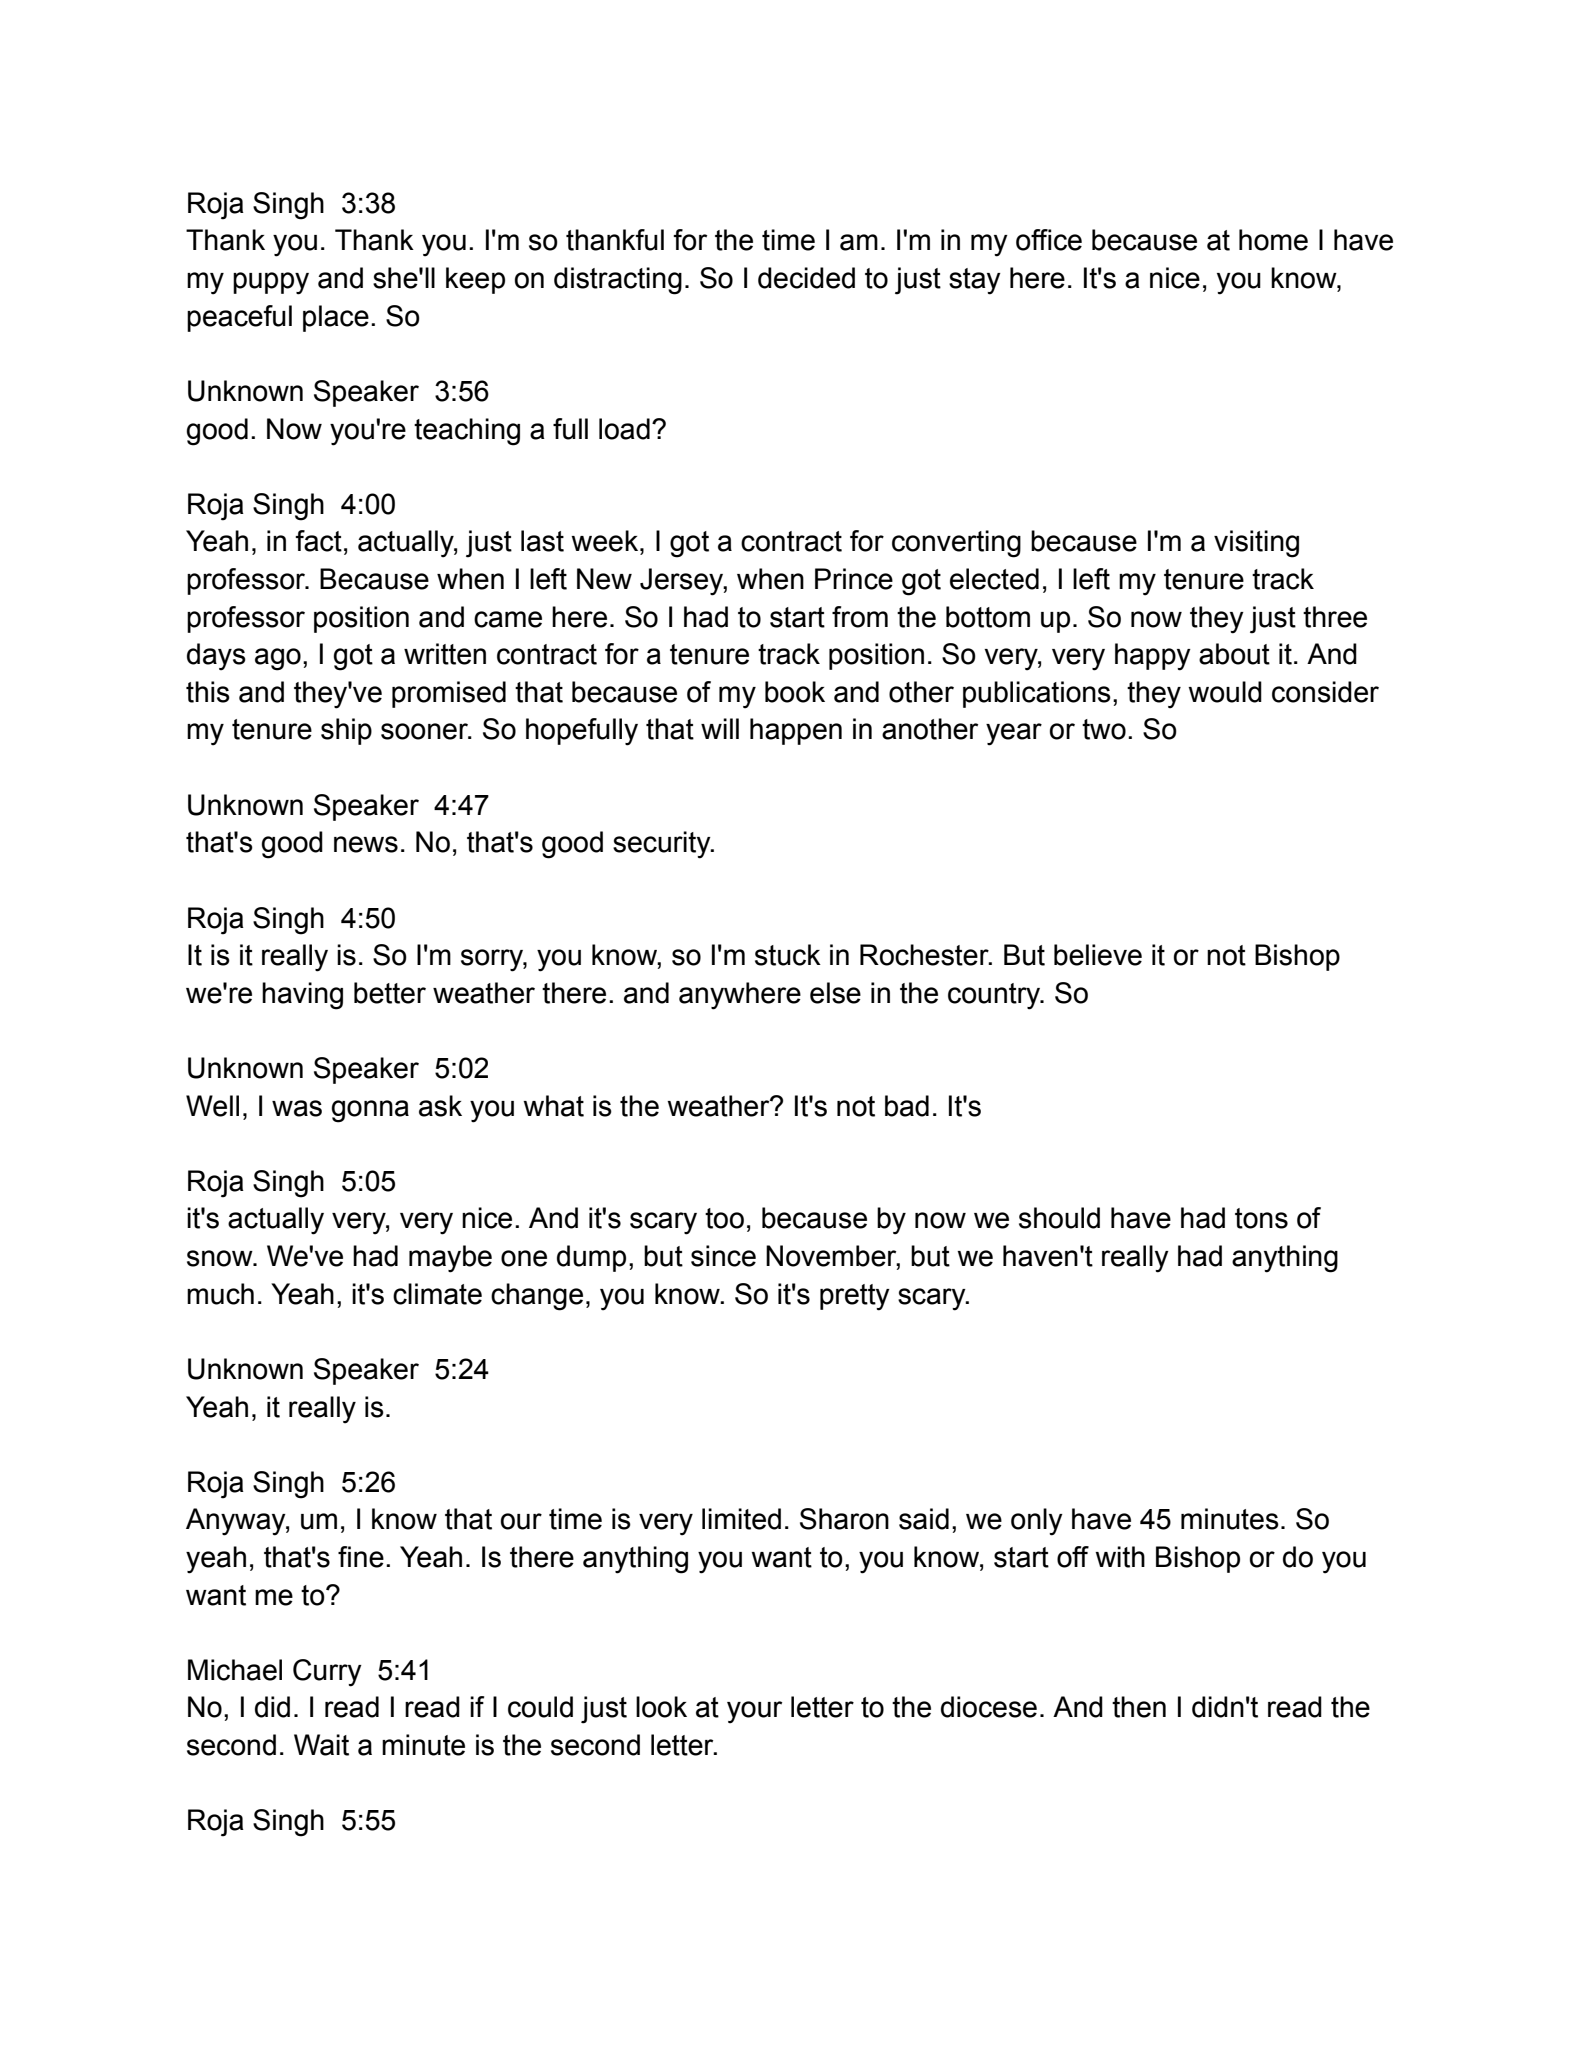 February 22nd, 2023 Zoom call transcript - Page 2